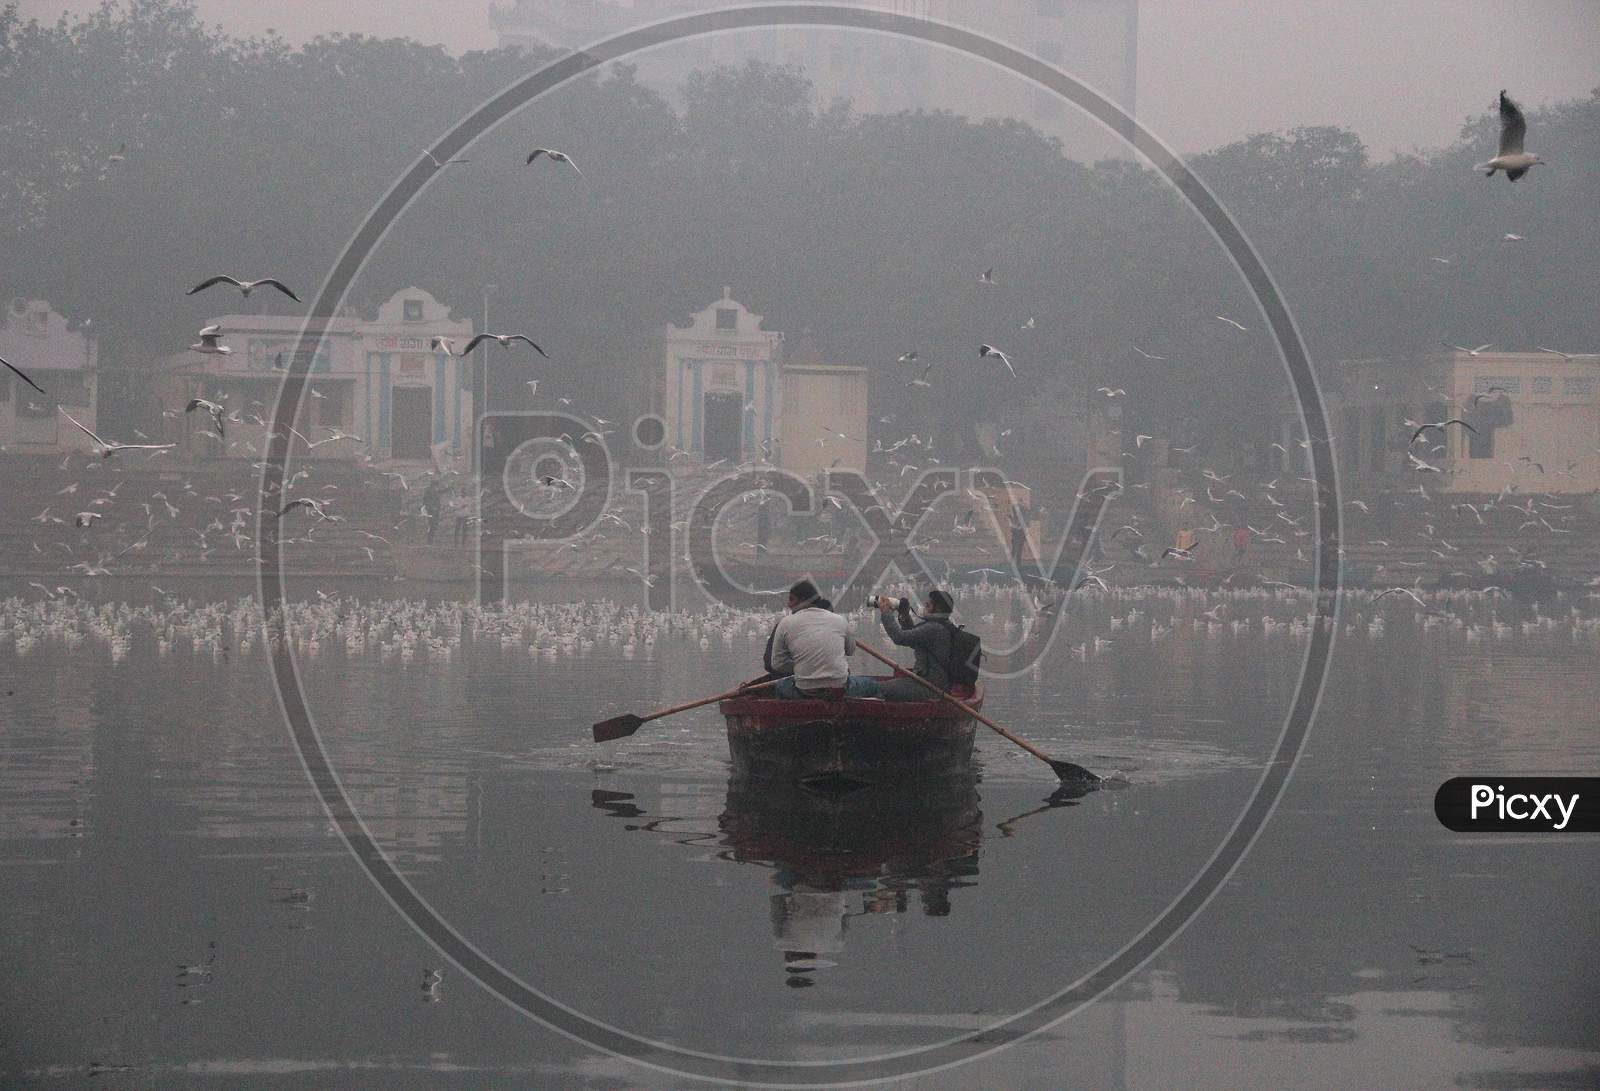 A man clicks photographs while riding a boat as a flock of birds fly over the Yamuna river on a smoggy morning in New Delhi, November 9, 2020.